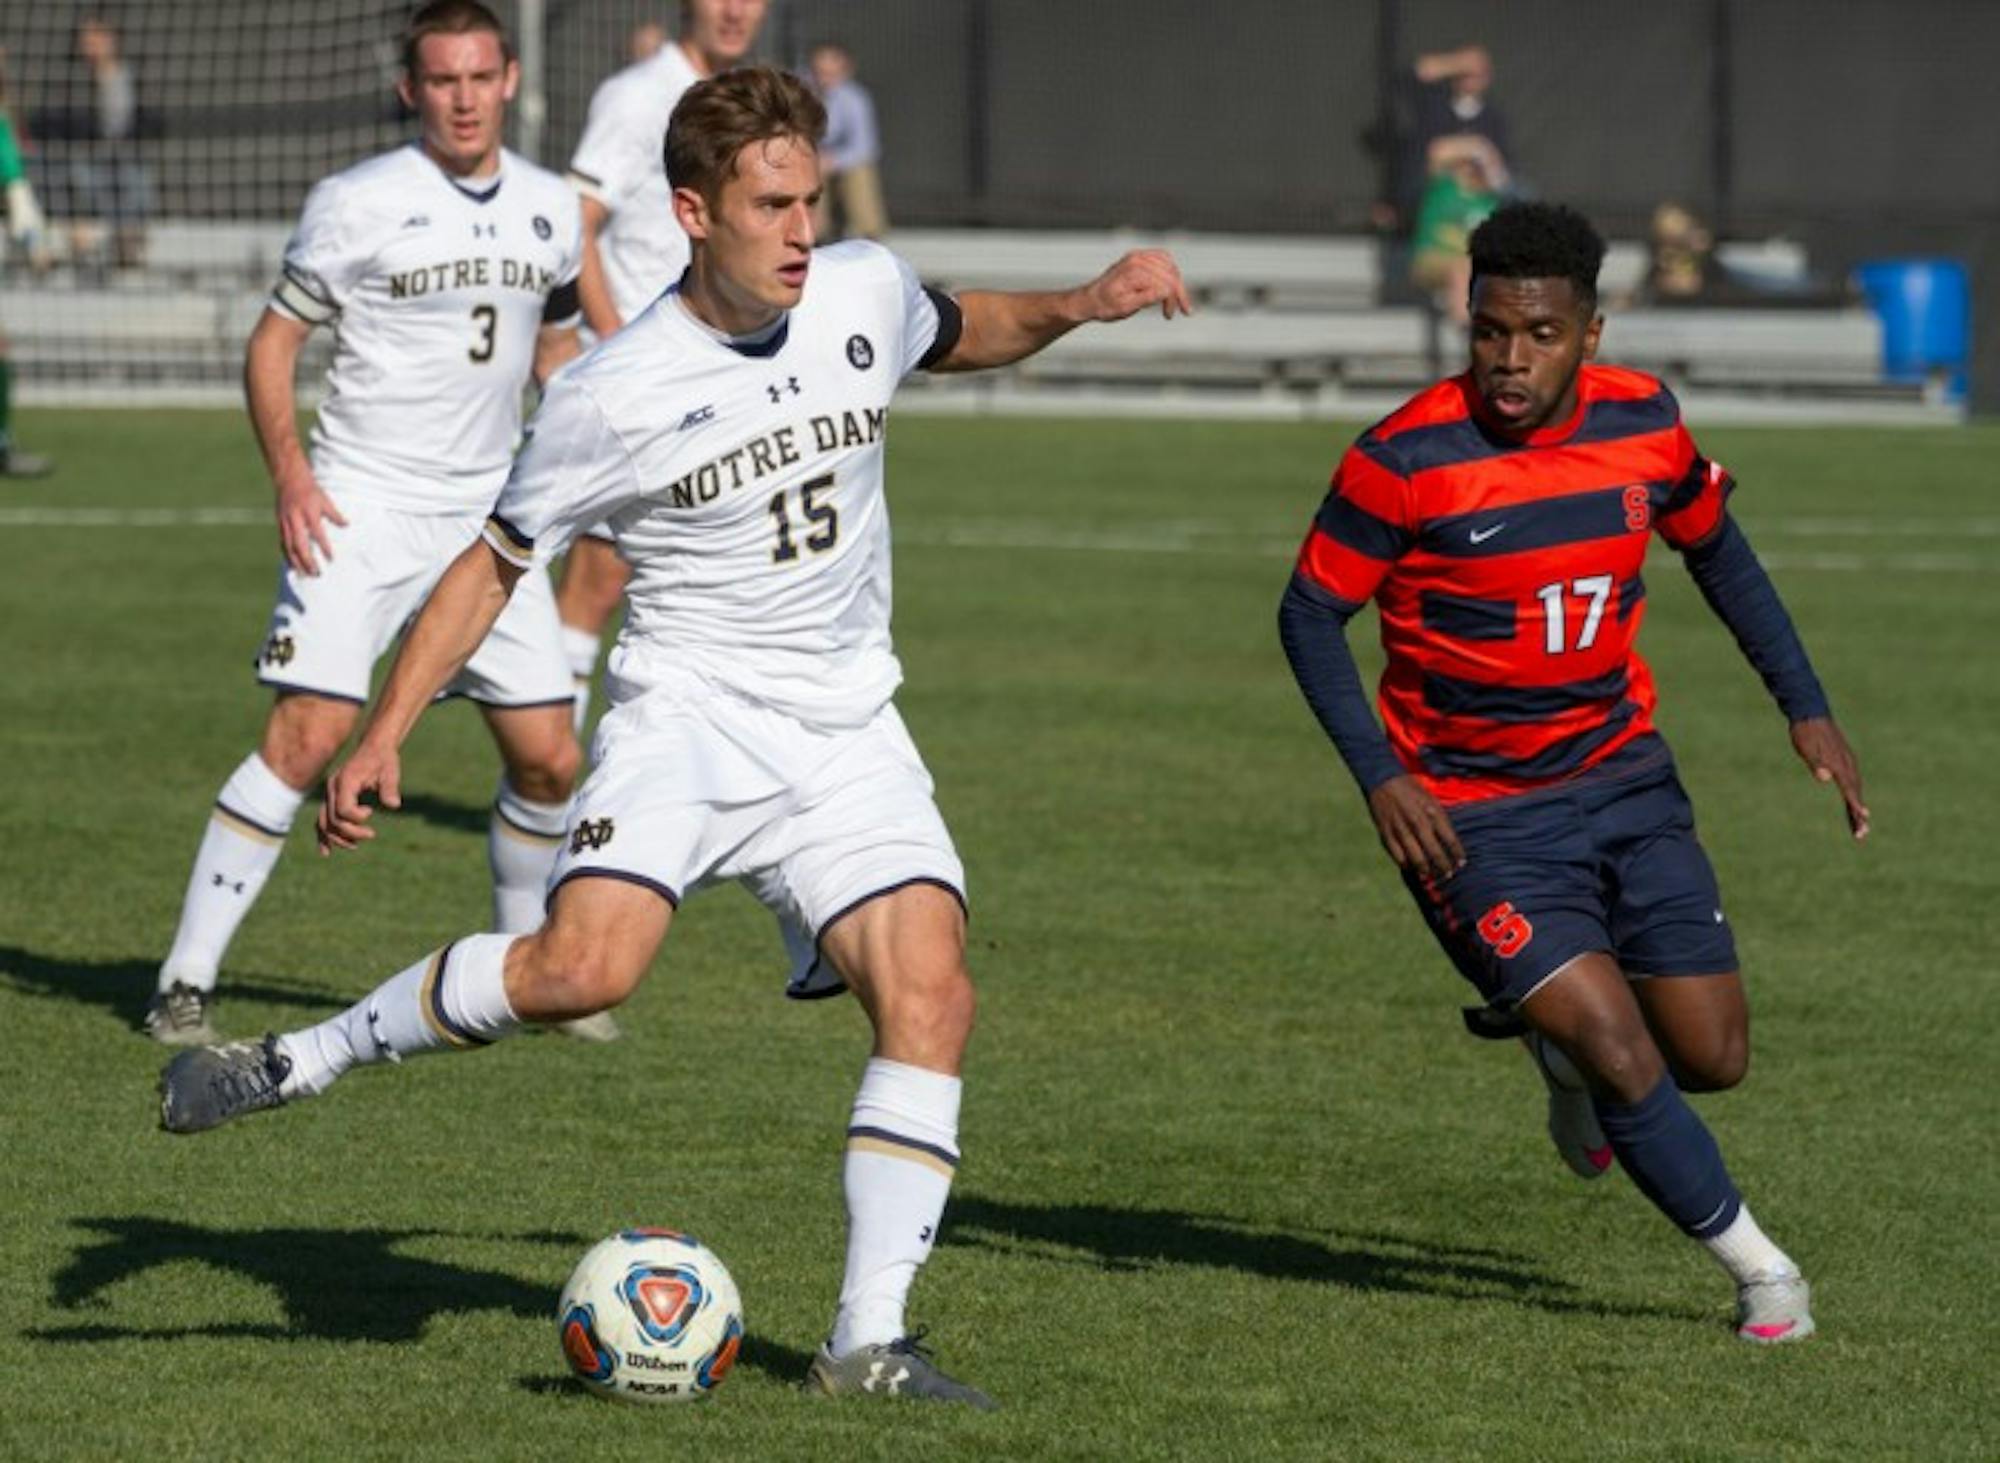 Senior midfielder Evan Panken looks to pass during Notre Dame’s 1-0 loss to Syracuse on Nov. 15 at Alumni Stadium. Panken had one assist in Saturday’s loss to Maryland.